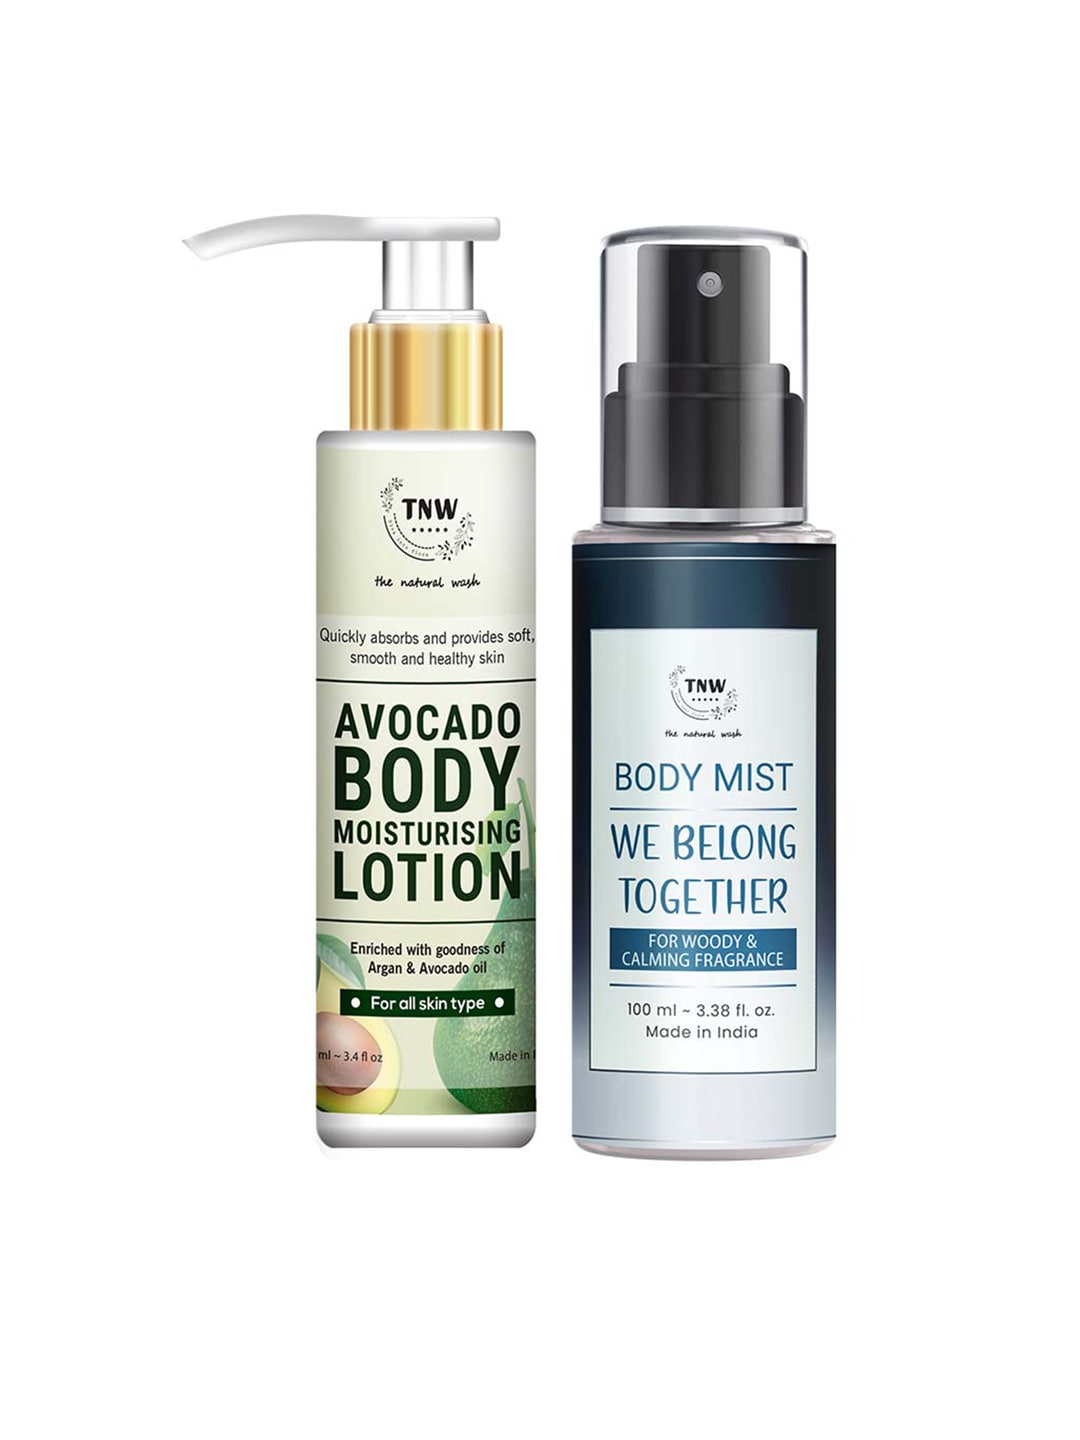 TNW the natural wash We Belong Together Body Mist - Avocado Body Moisturising Lotion Price in India